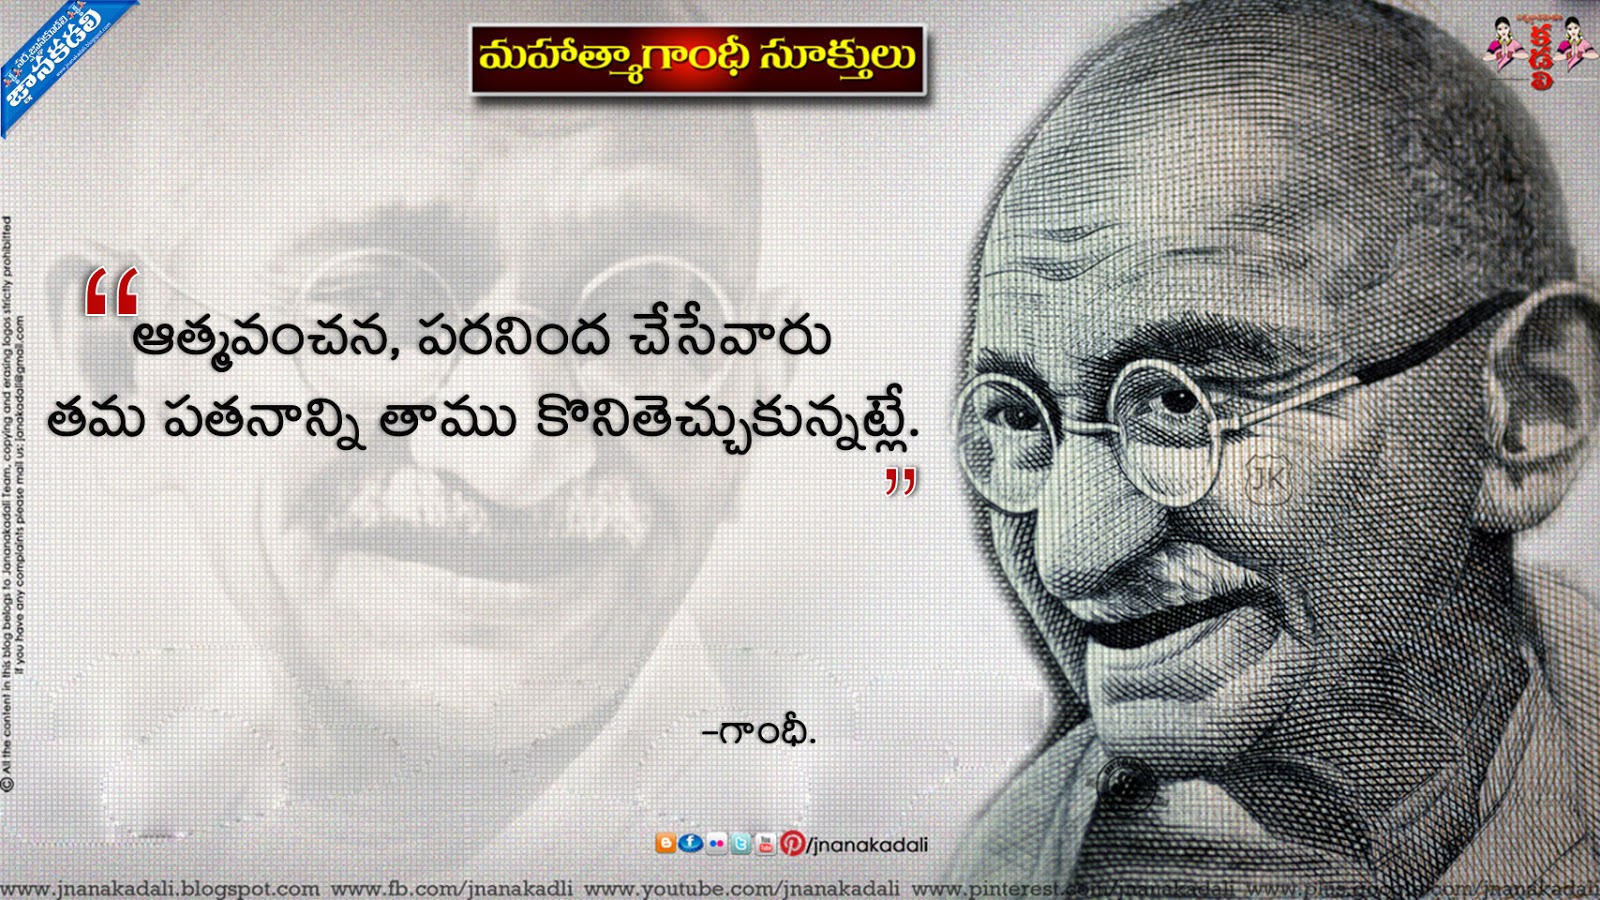 Gandhi Jayanti 2022 Quotes & Mahatma Gandhi Images: WhatsApp Status,  Facebook Post, HD Wallpapers, Greetings and Messages To Celebrate Bapu's  153rd Birth Anniversary | 🙏🏻 LatestLY